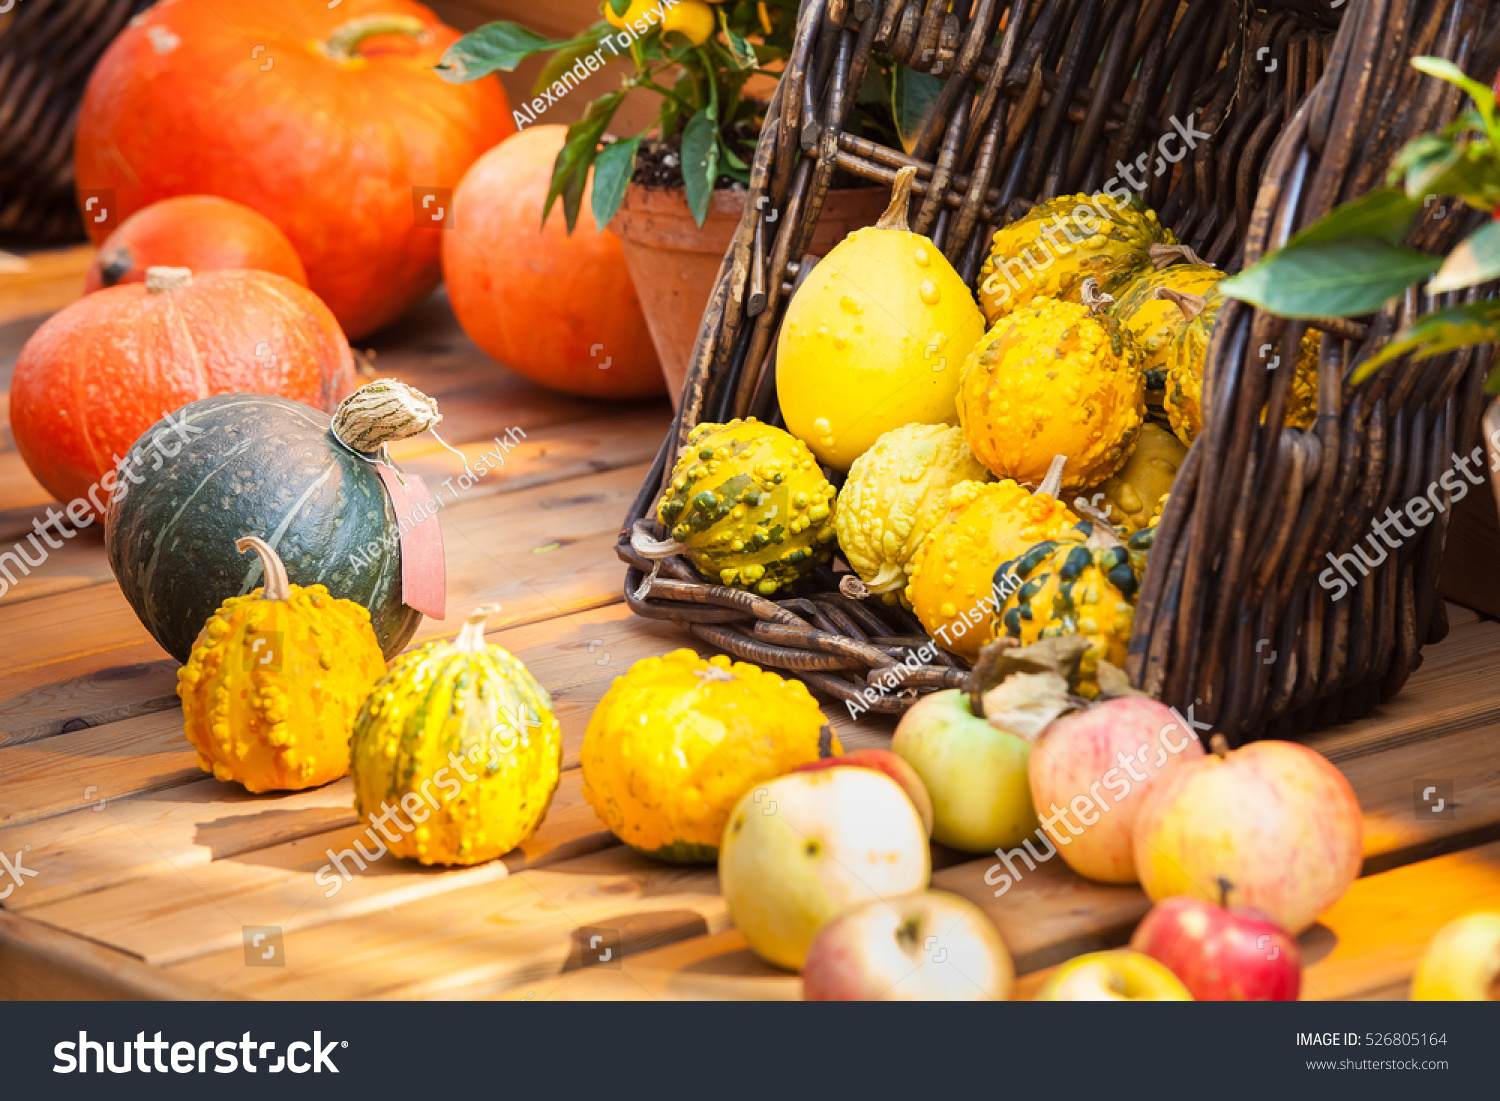 Autumn harvest background with small decorative pumpkins on the table #526805164